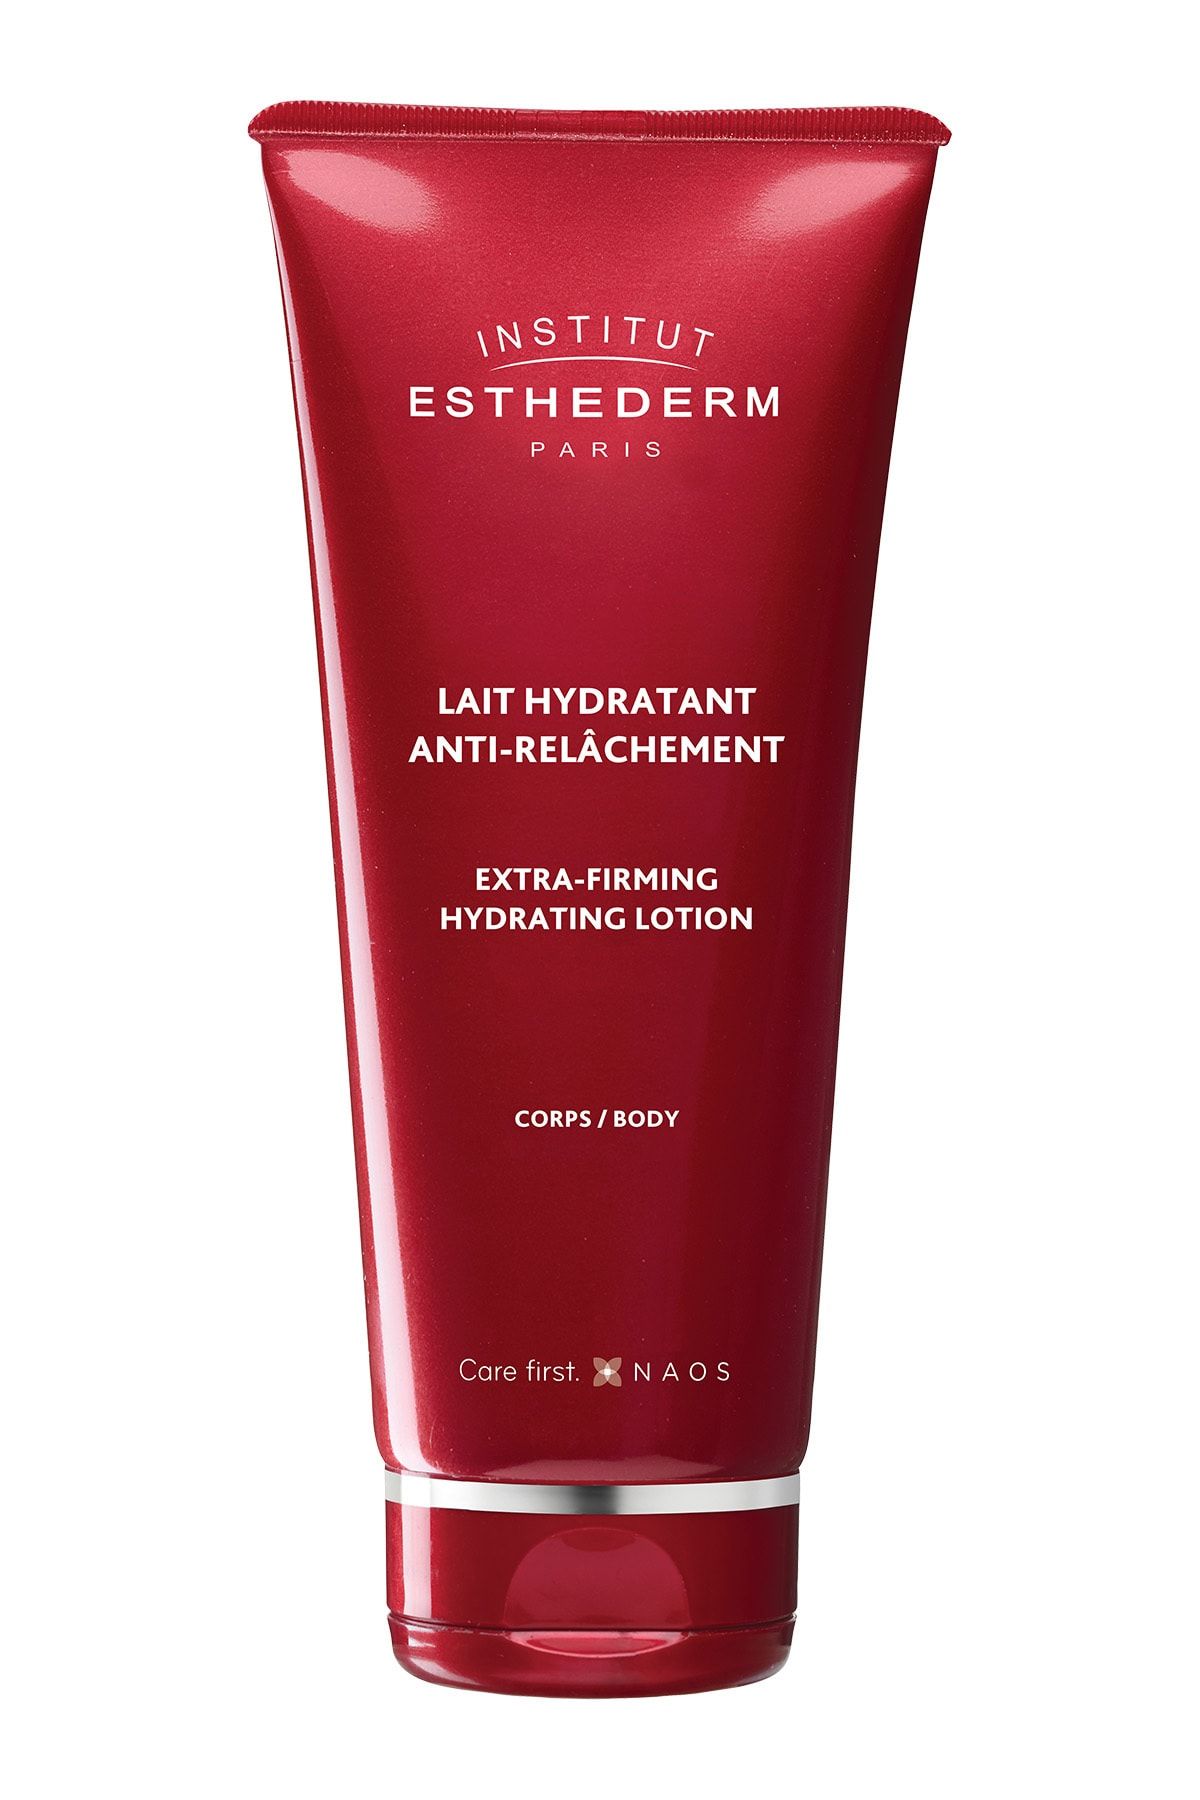 INSTITUT ESTHEDERM Extra-Firming Hydrating Lotion 200 ml 3461020014250